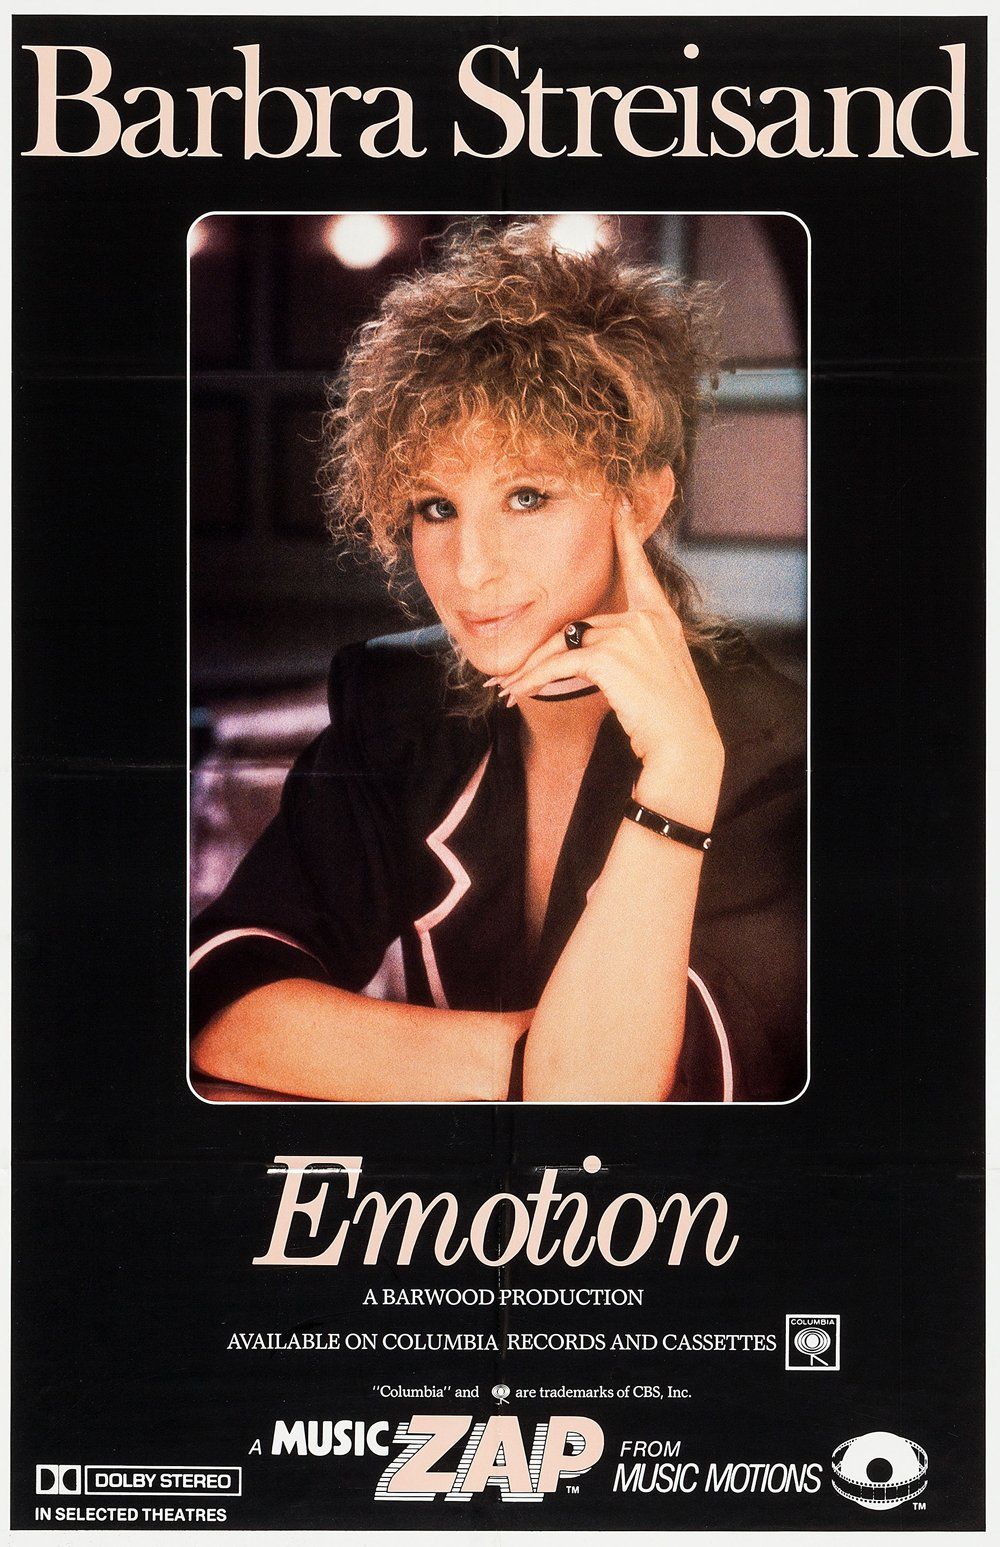 Theatrical poster for Streisand's music video of Emotion.